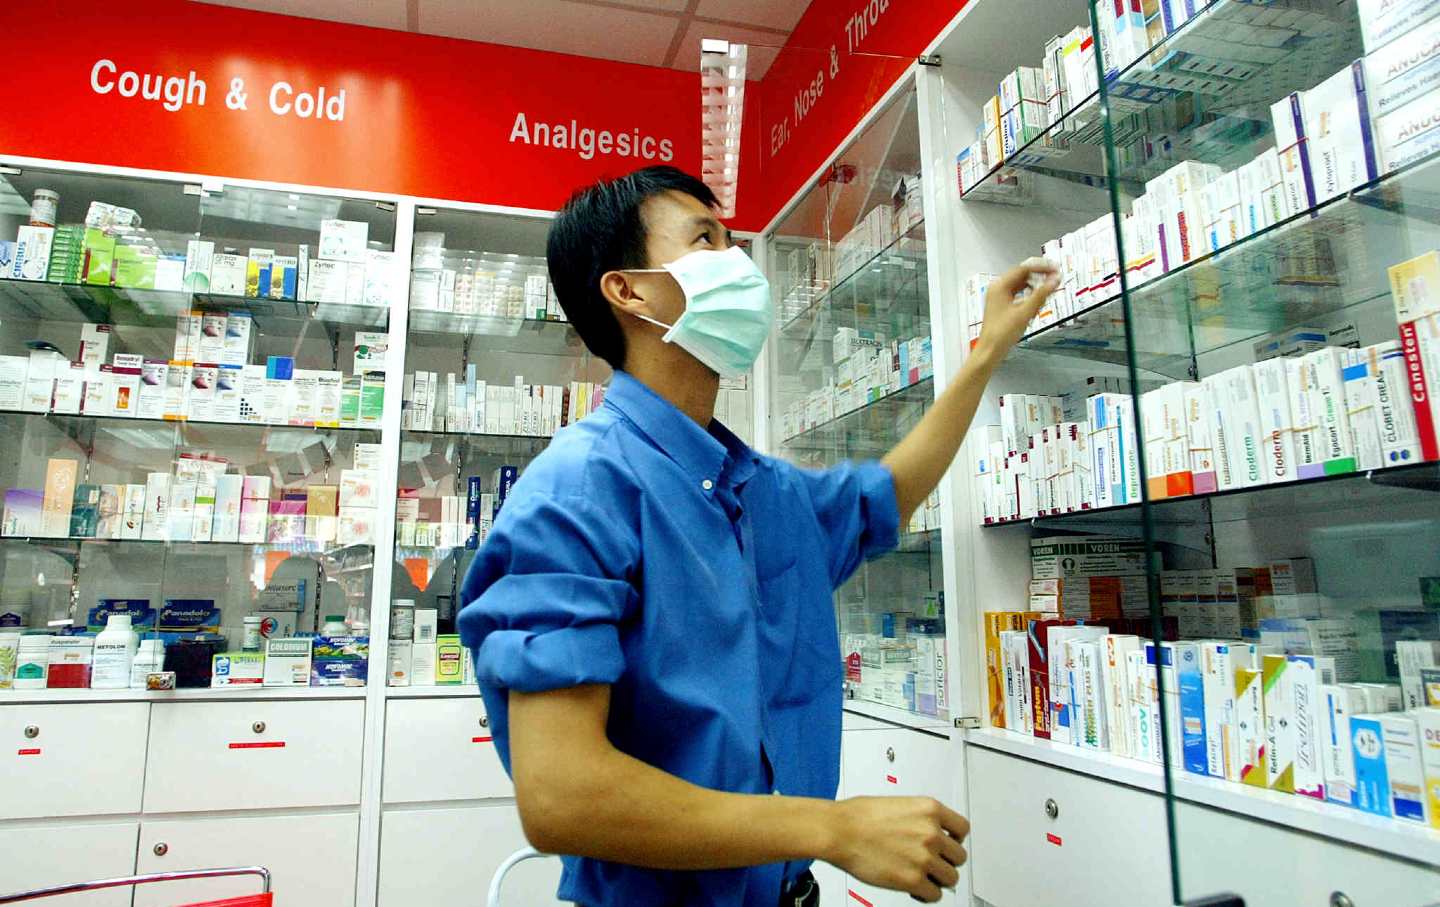 A pharmacist checks his stock while wearing a surgical mask.